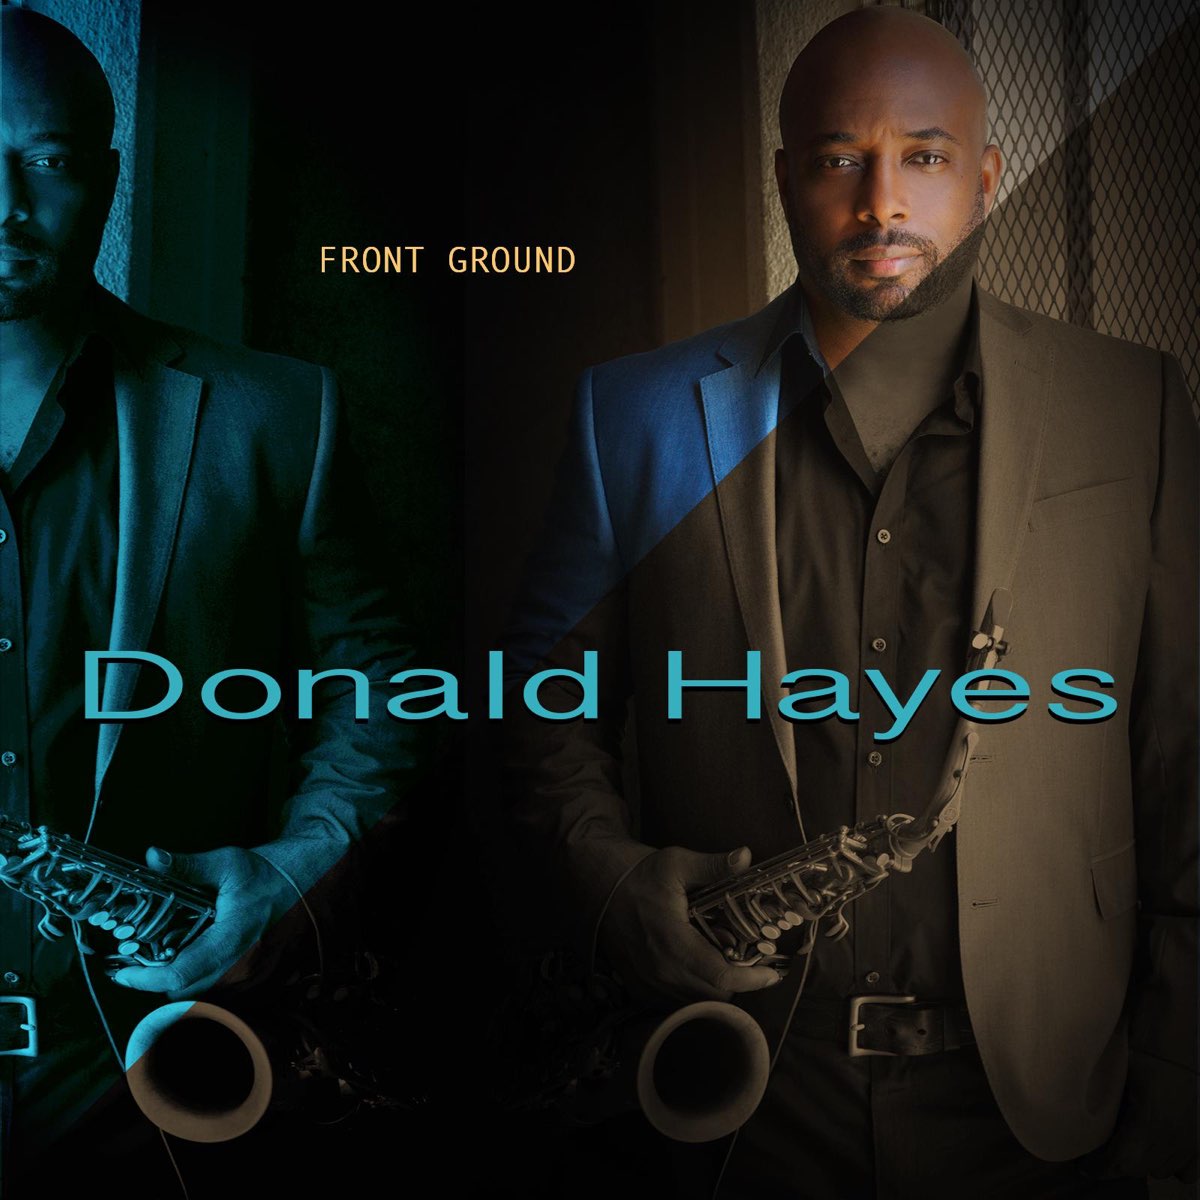 When don arrive. Front ground. D.A. Scott - we as one feat Donald Hayes.